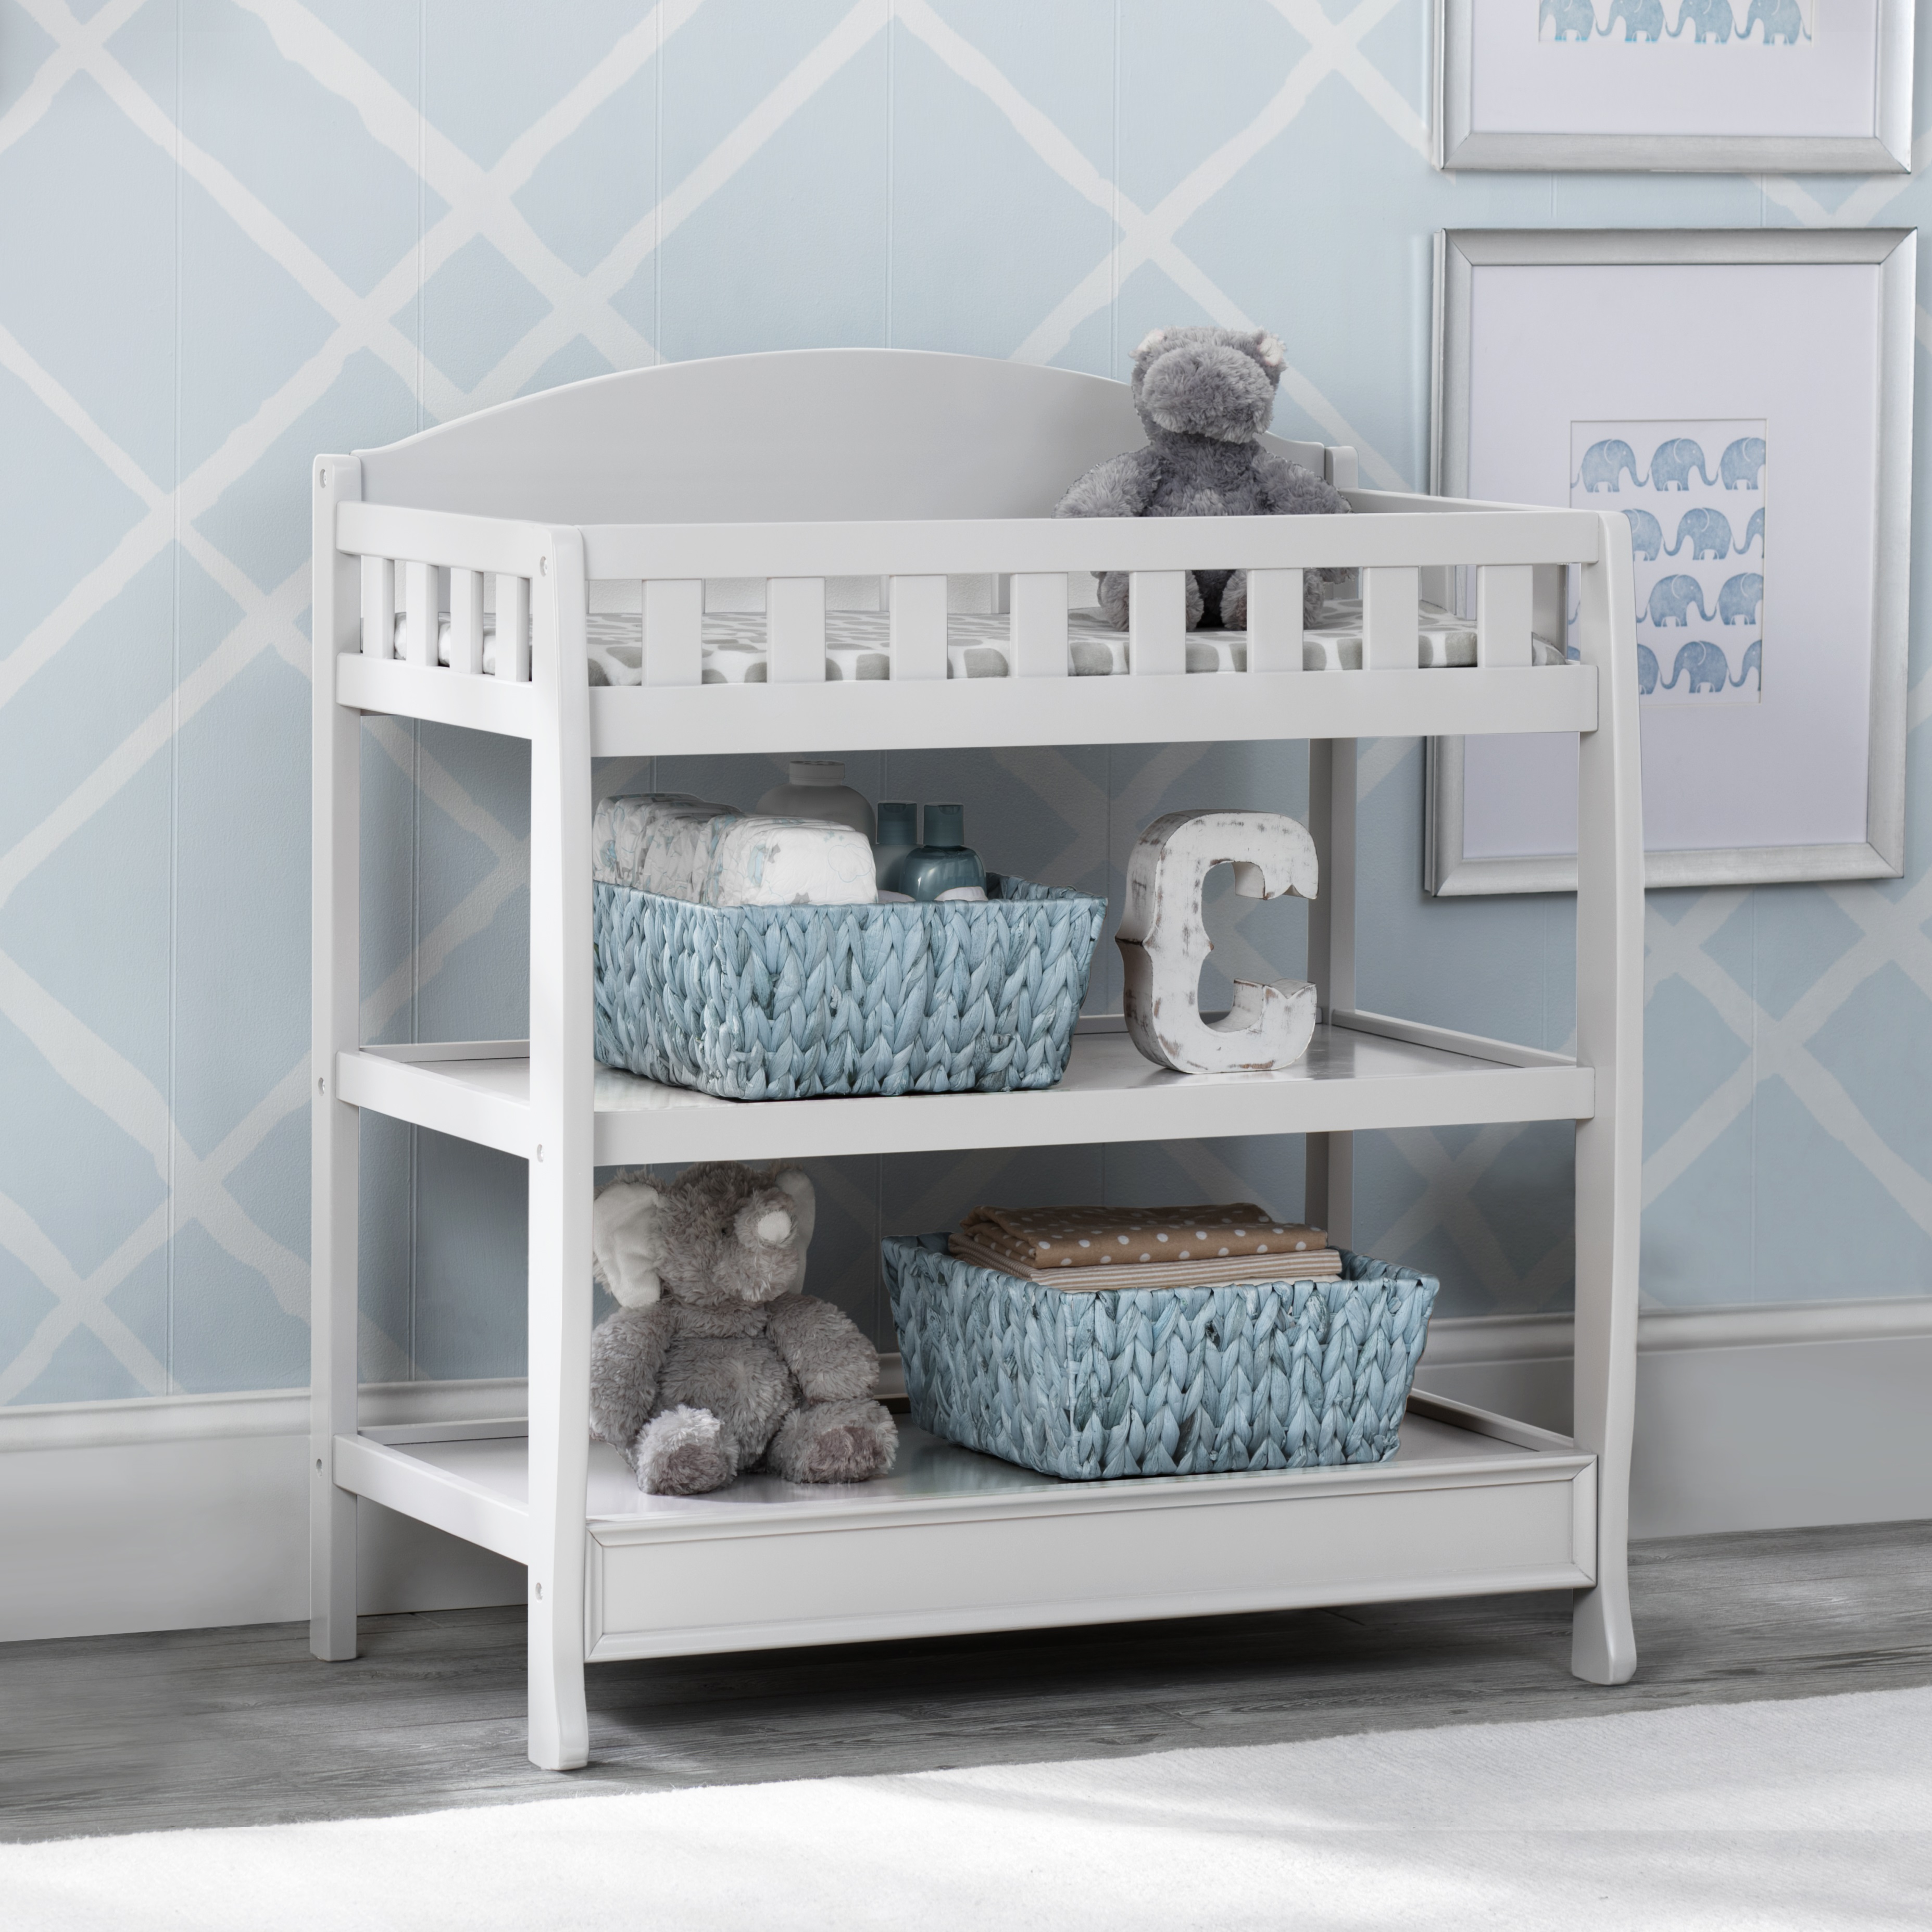 Delta Children Wilmington Wood Changing Table with Pad, White - image 4 of 6